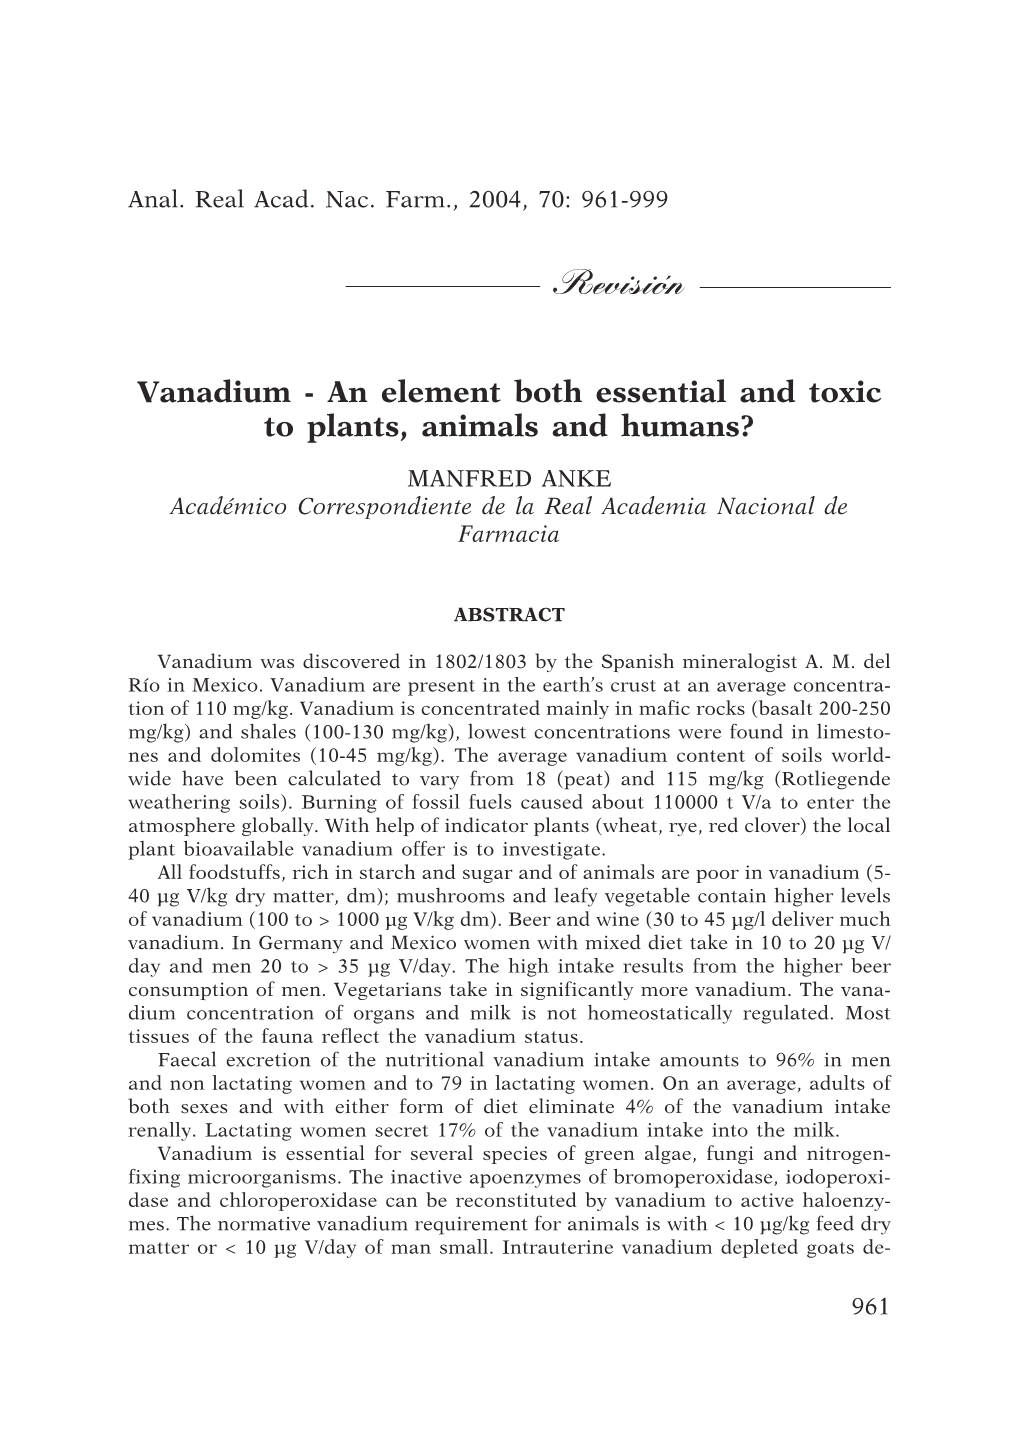 Vanadium - an Element Both Essential and Toxic to Plants, Animals and Humans?